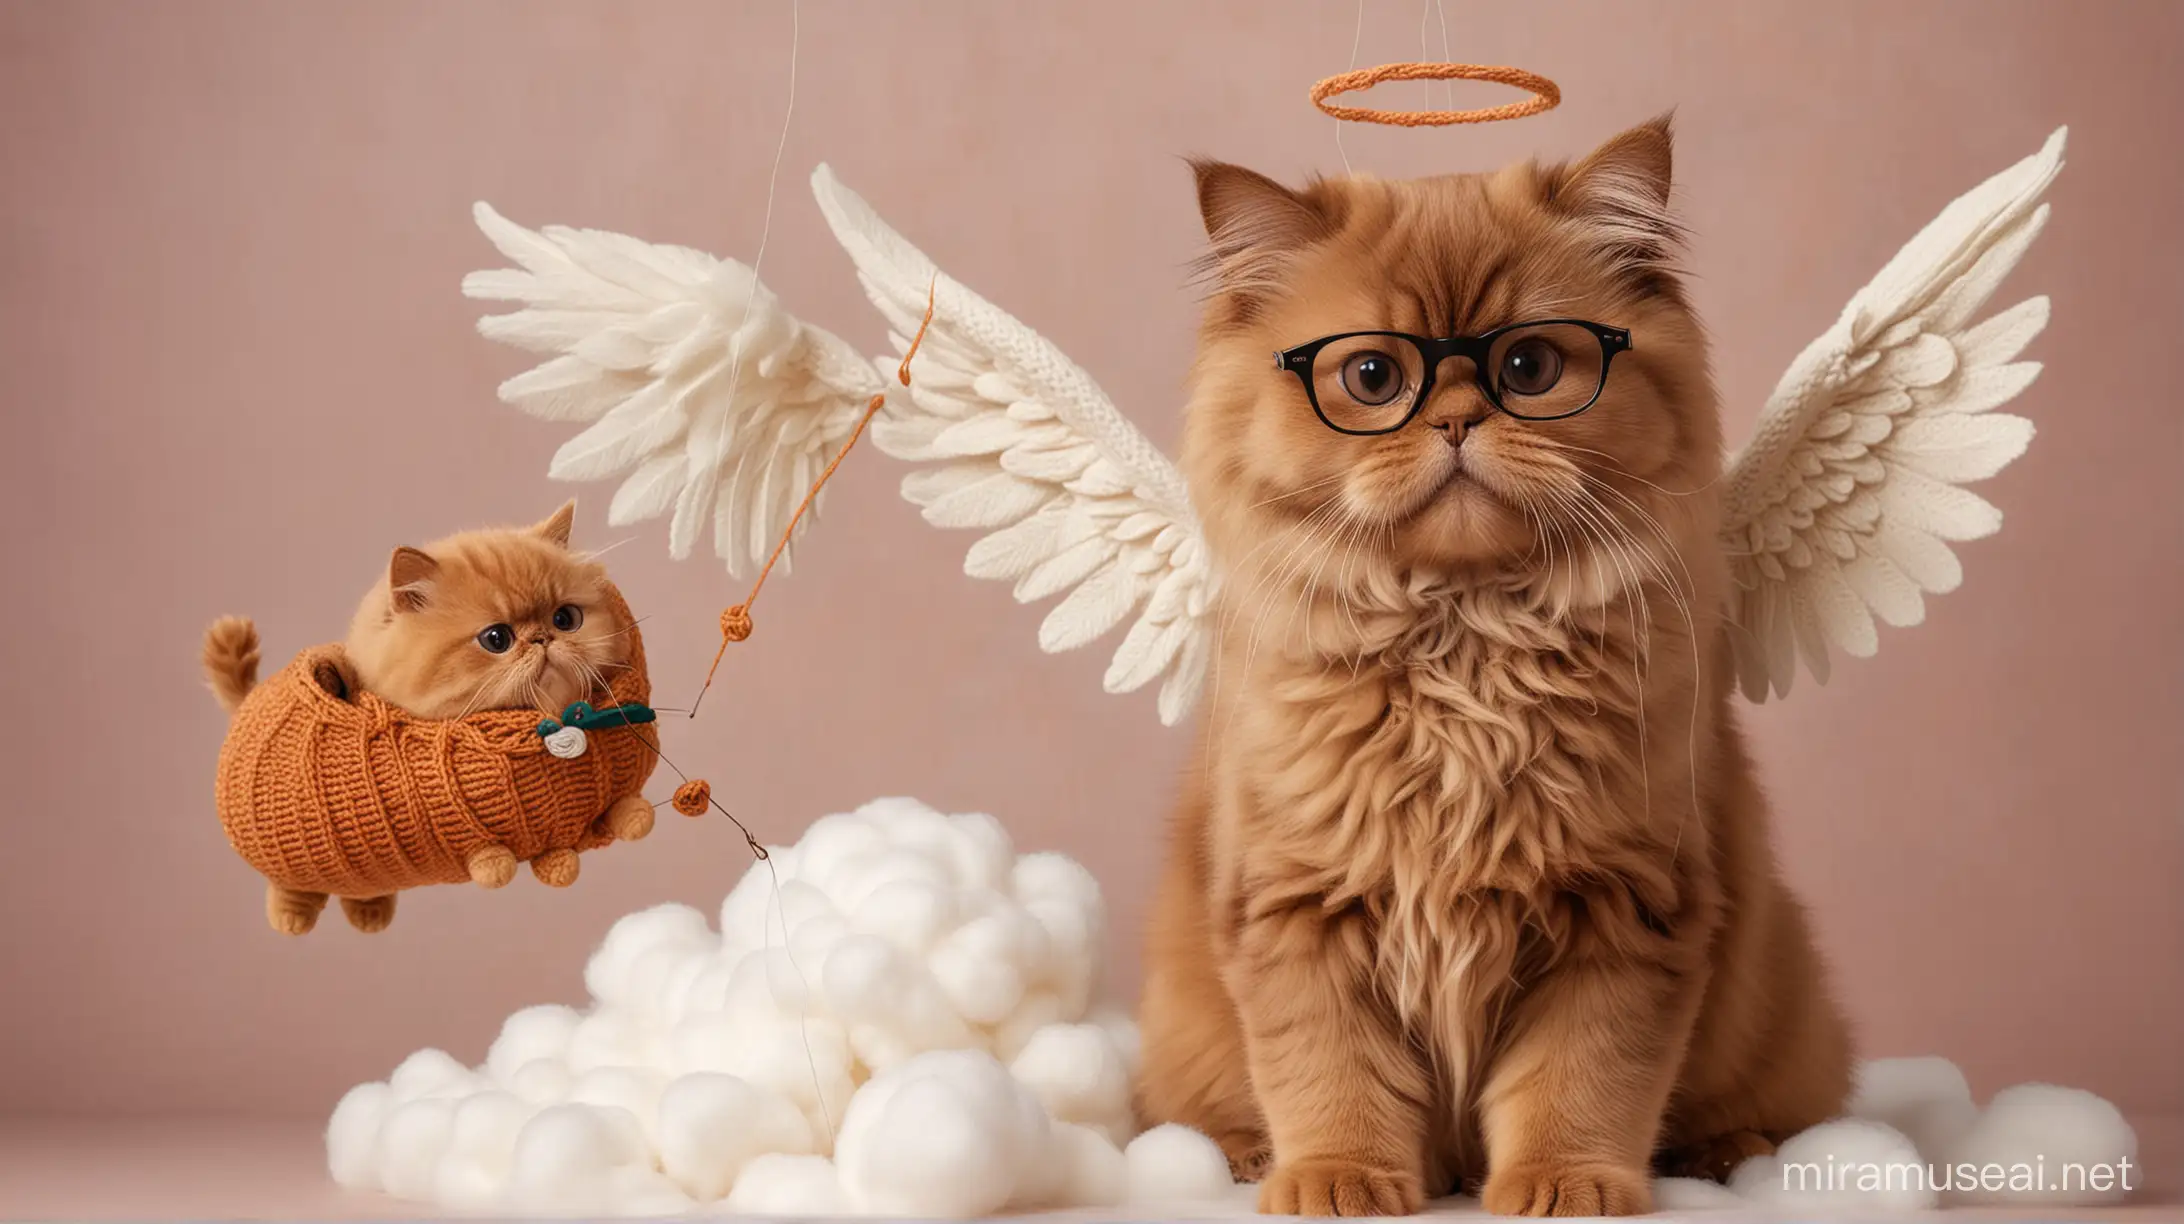 Angel Knitting on Cloud with Winged Persian Cat